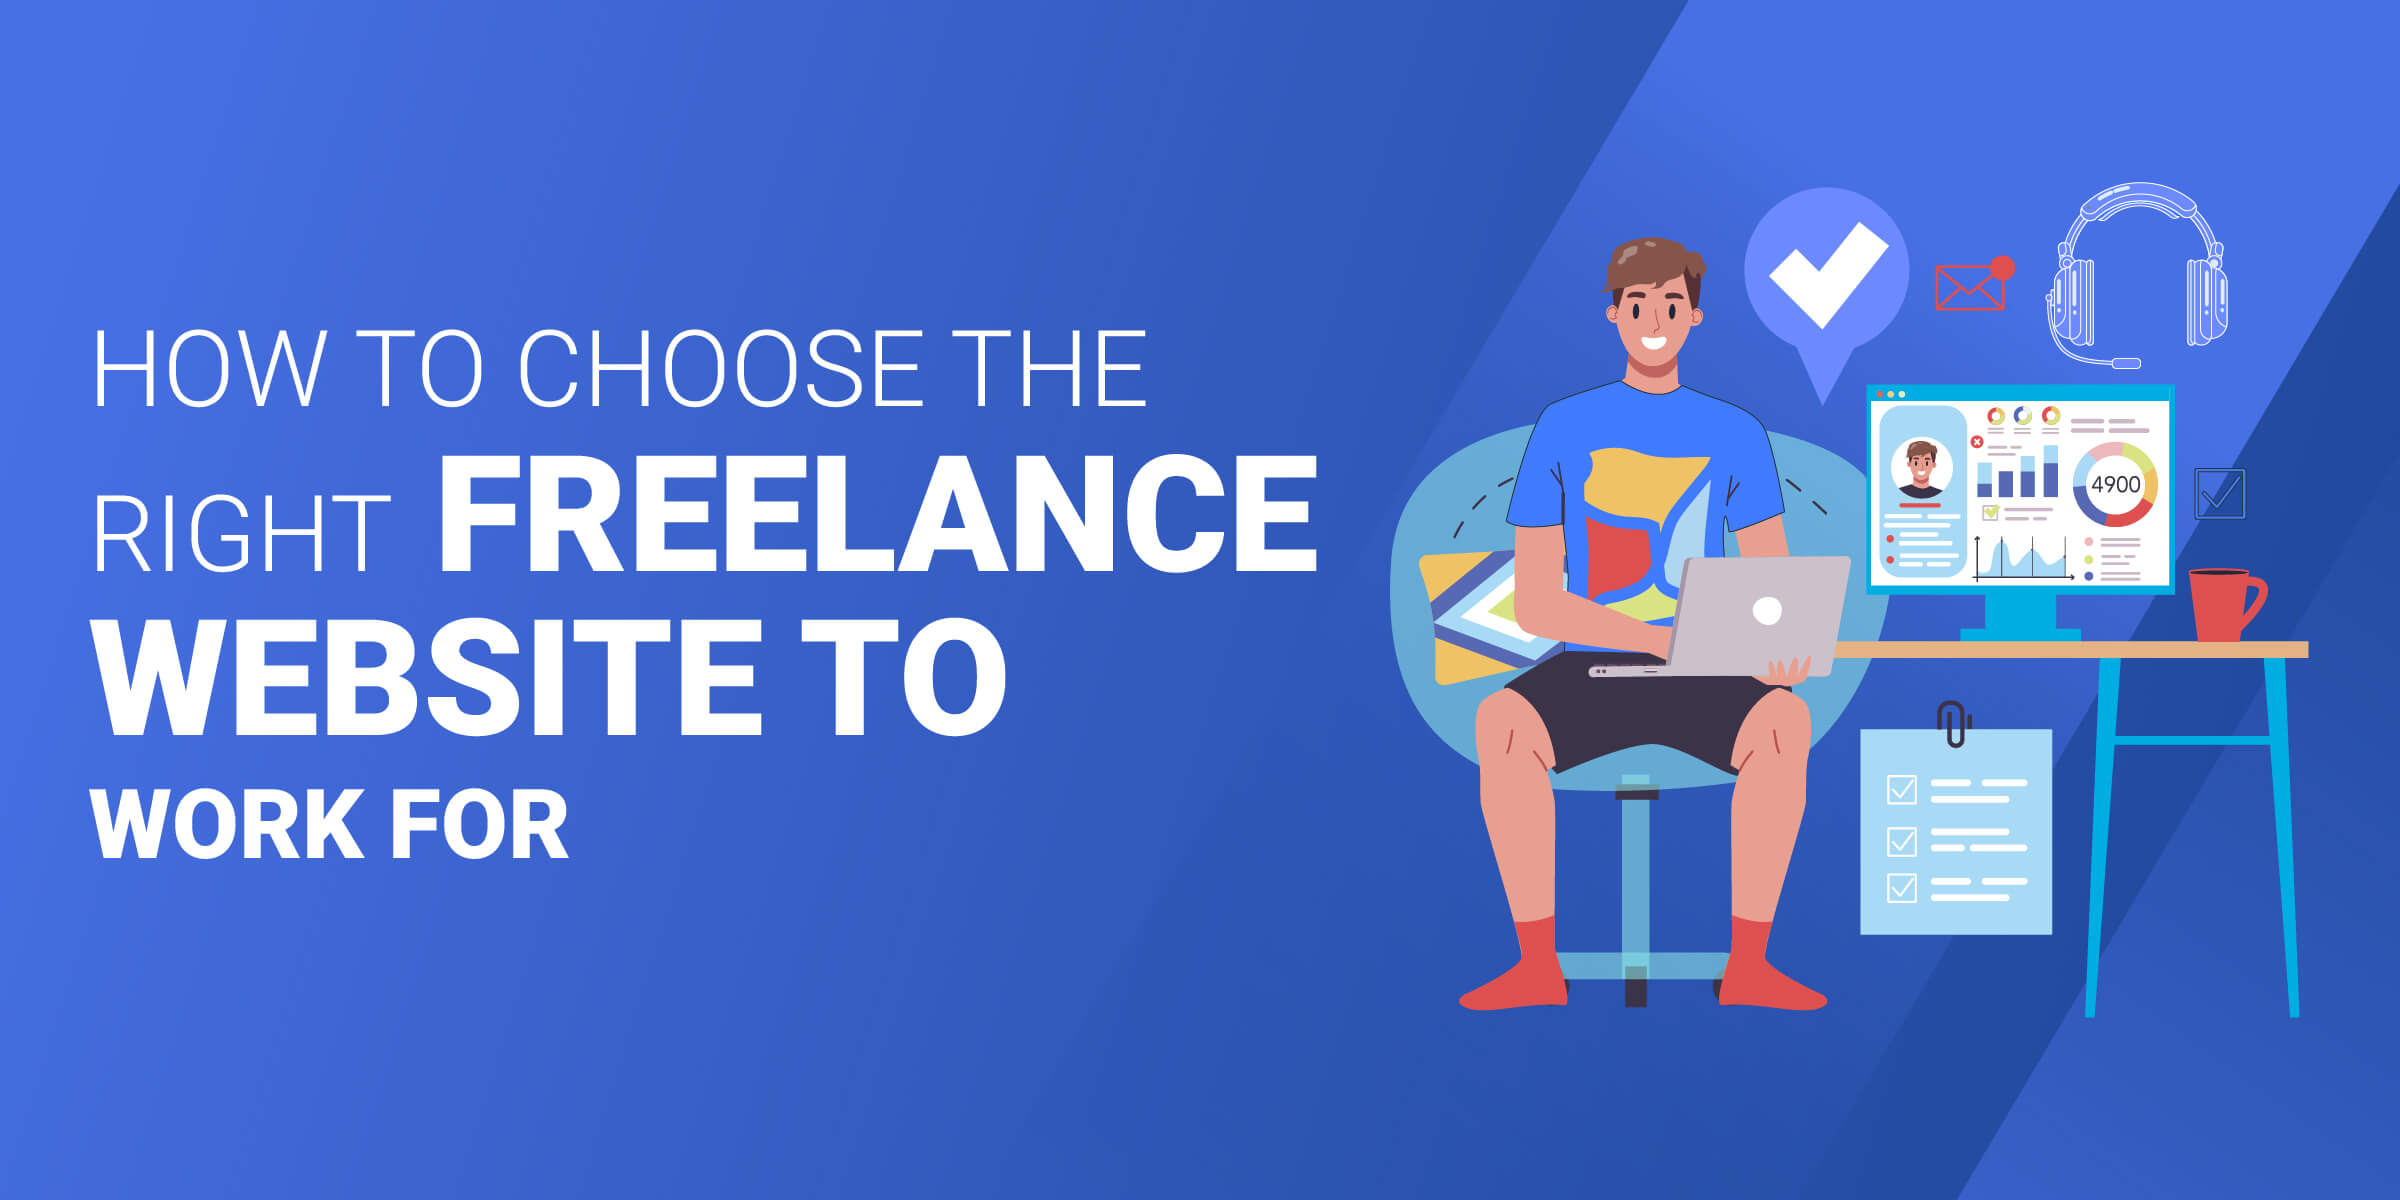 How to Choose Freelance Website as Virtual Assistant